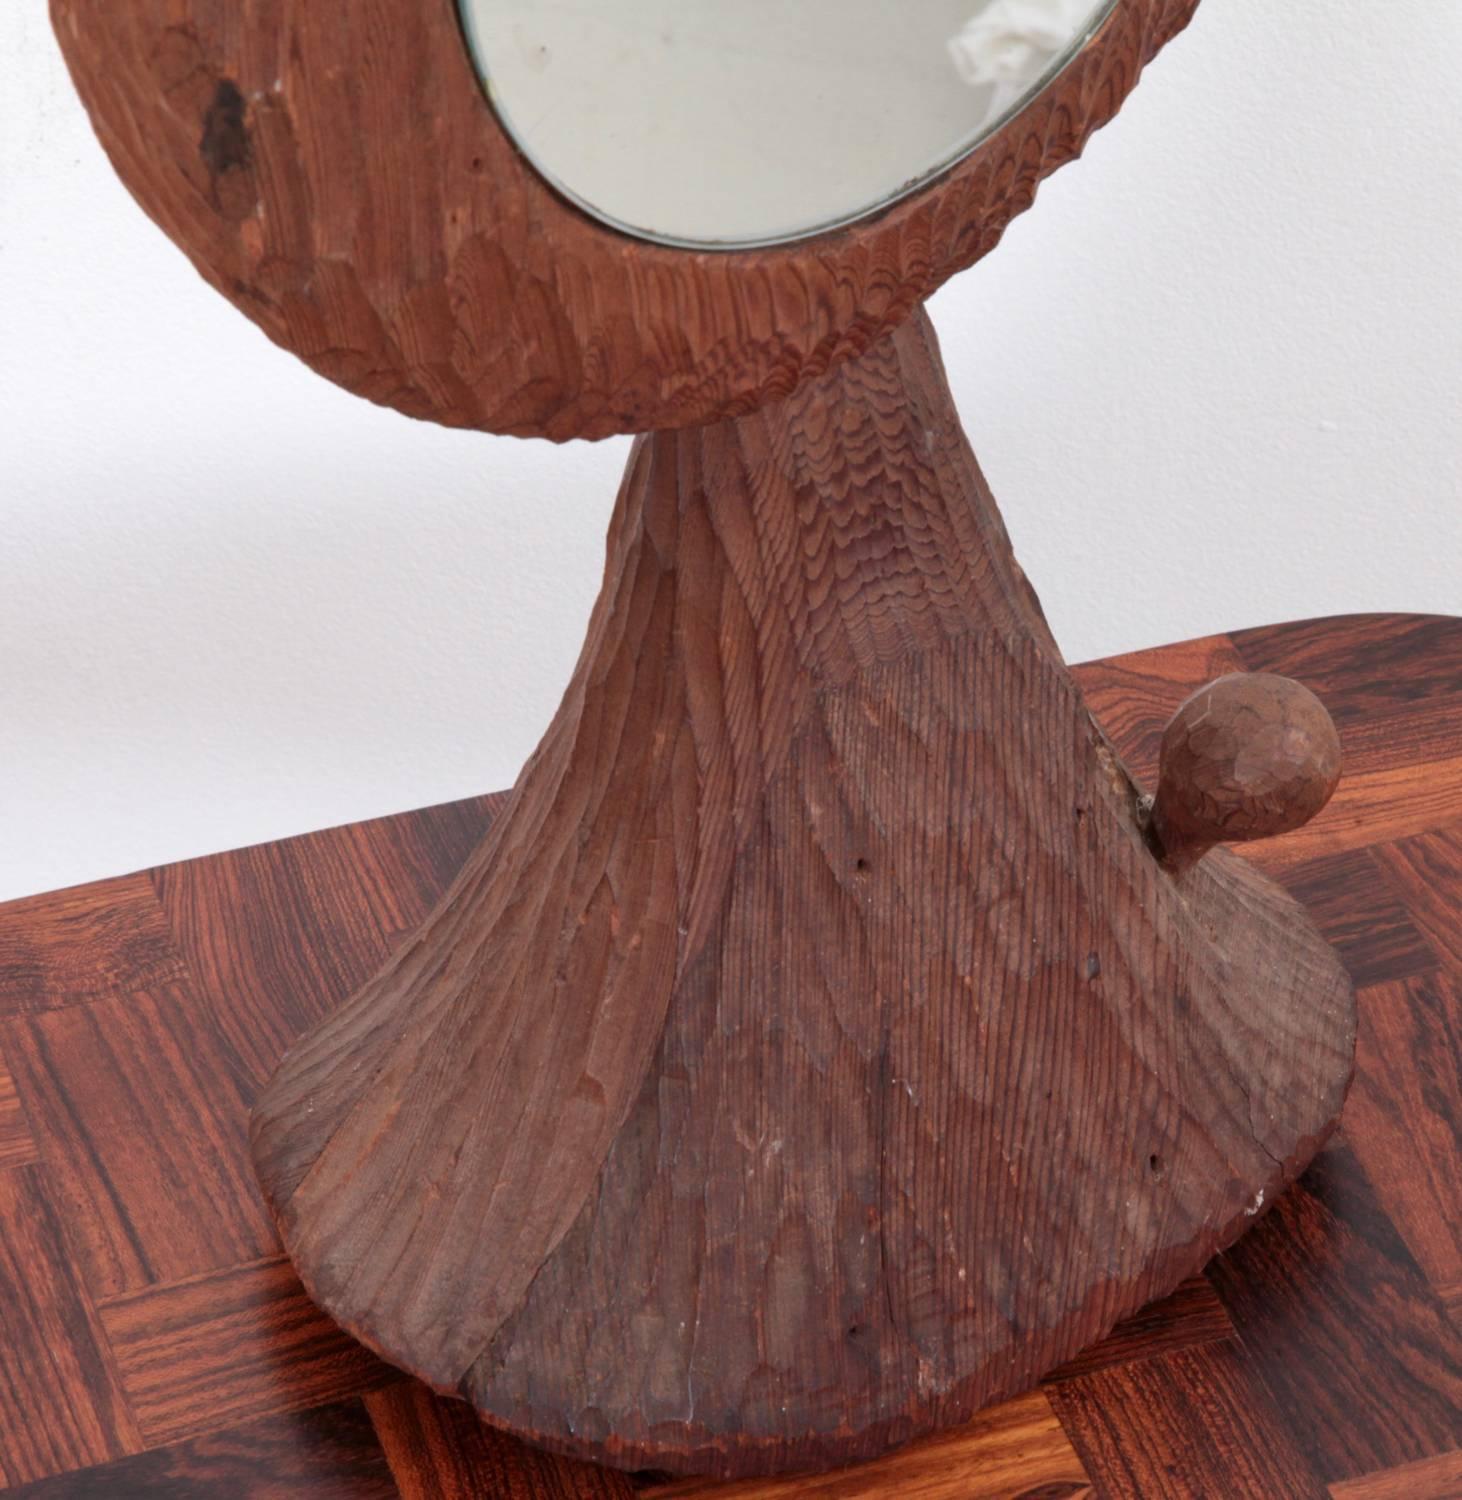 Hand-carved solid redwood sculpture with mirror by Jdmz. A 1960s studio piece in excellent condition.

